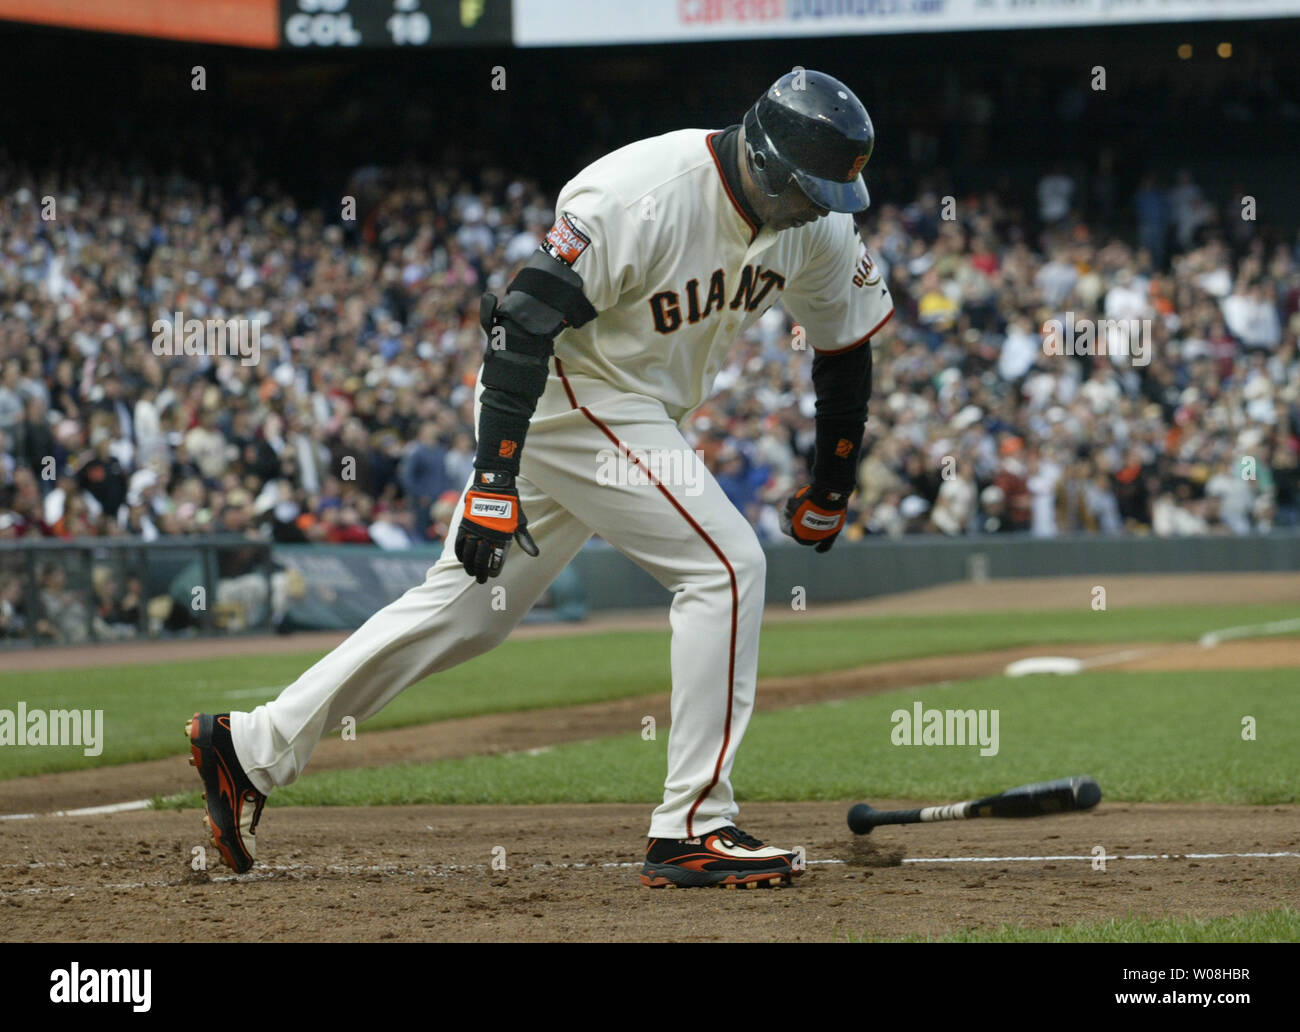 San Francisco Giants Barry Bonds slams down his bat after flying out to left field in the fifth inning against the Atlanta Braves at AT&T Park in San Francisco on July 26, 2007.  (UPI Photo/Bruce Gordon) Stock Photo